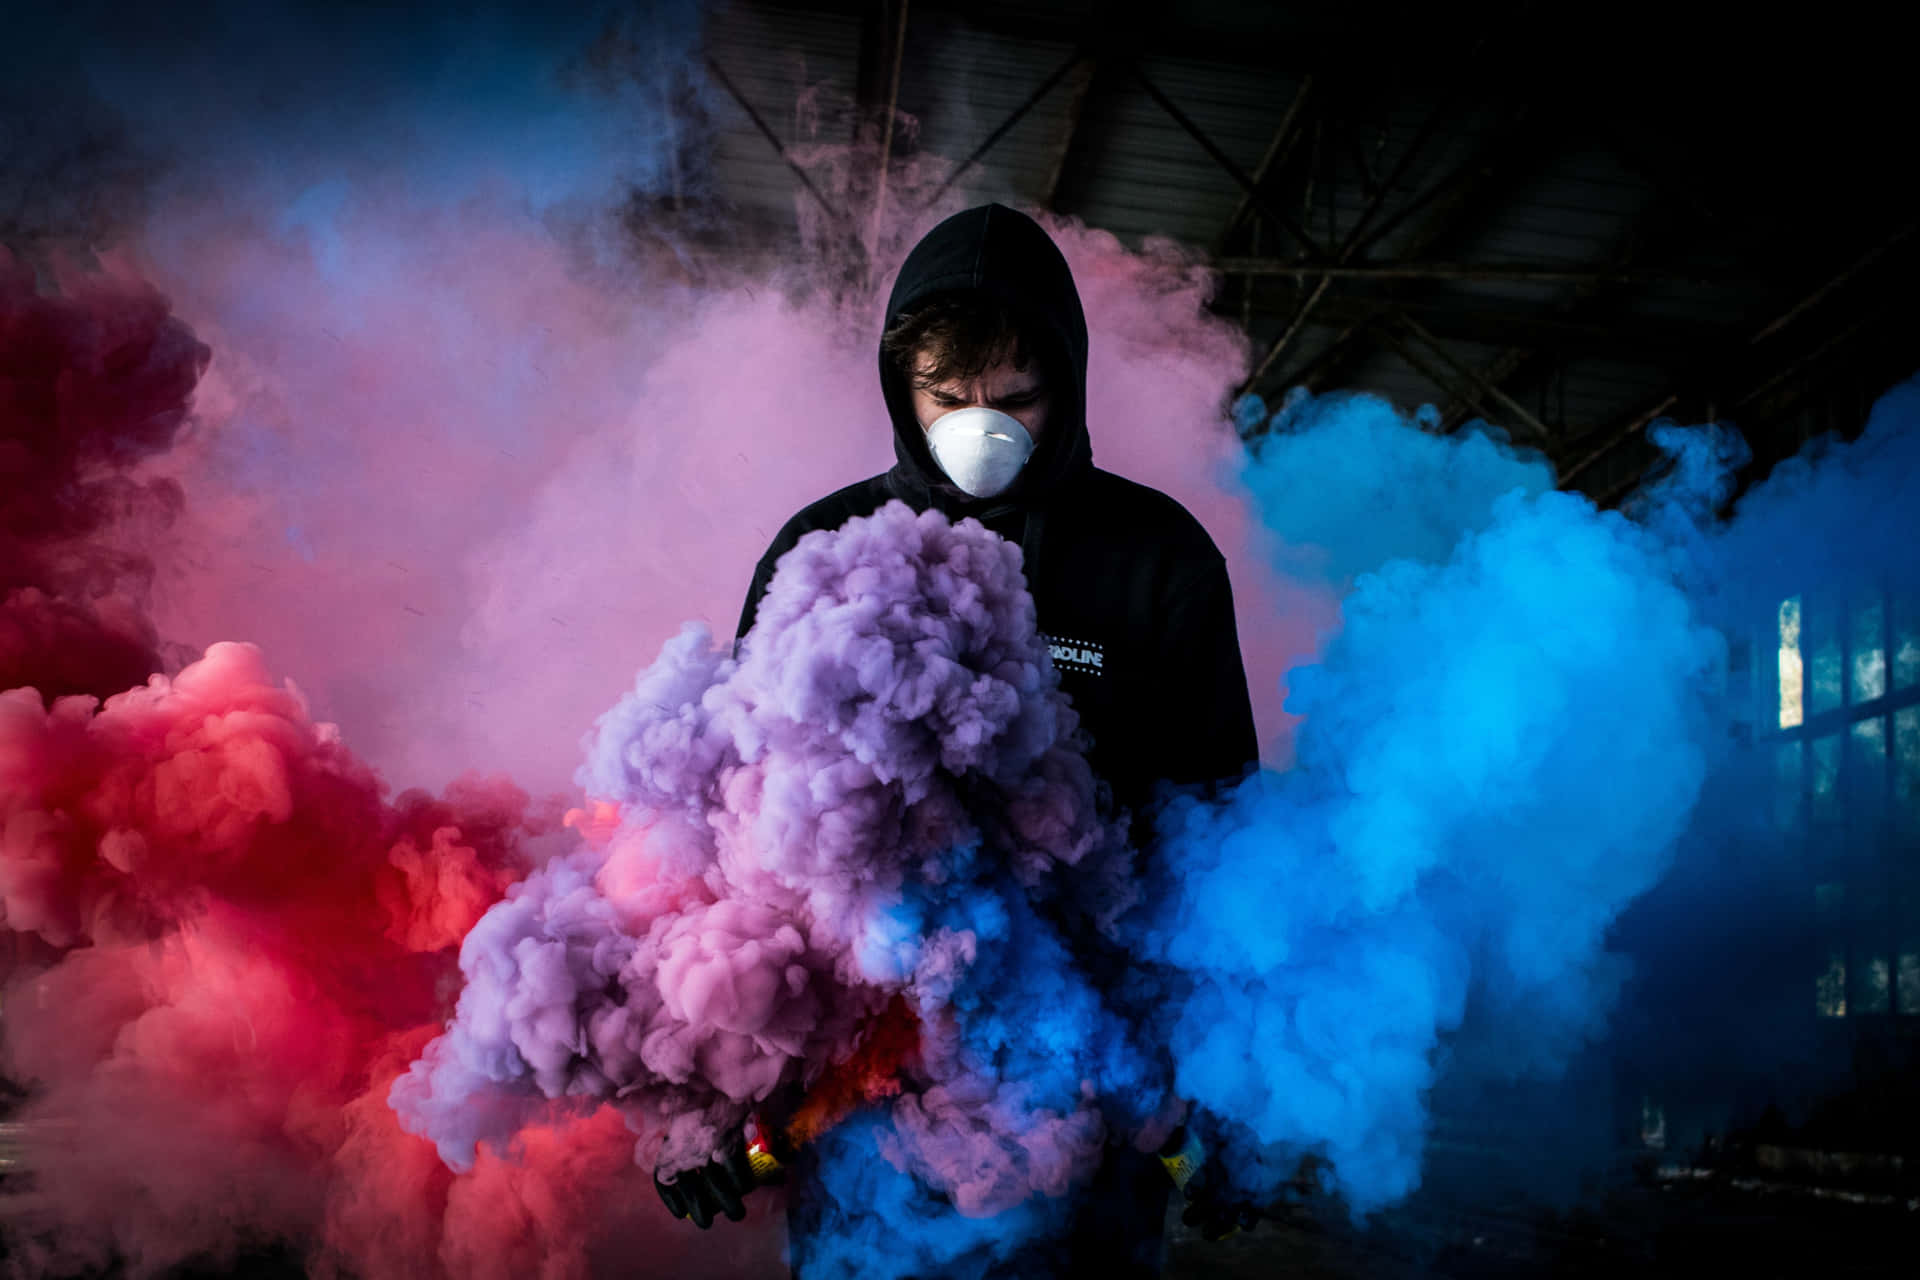 Man In Smoke Bomb Photograph Background